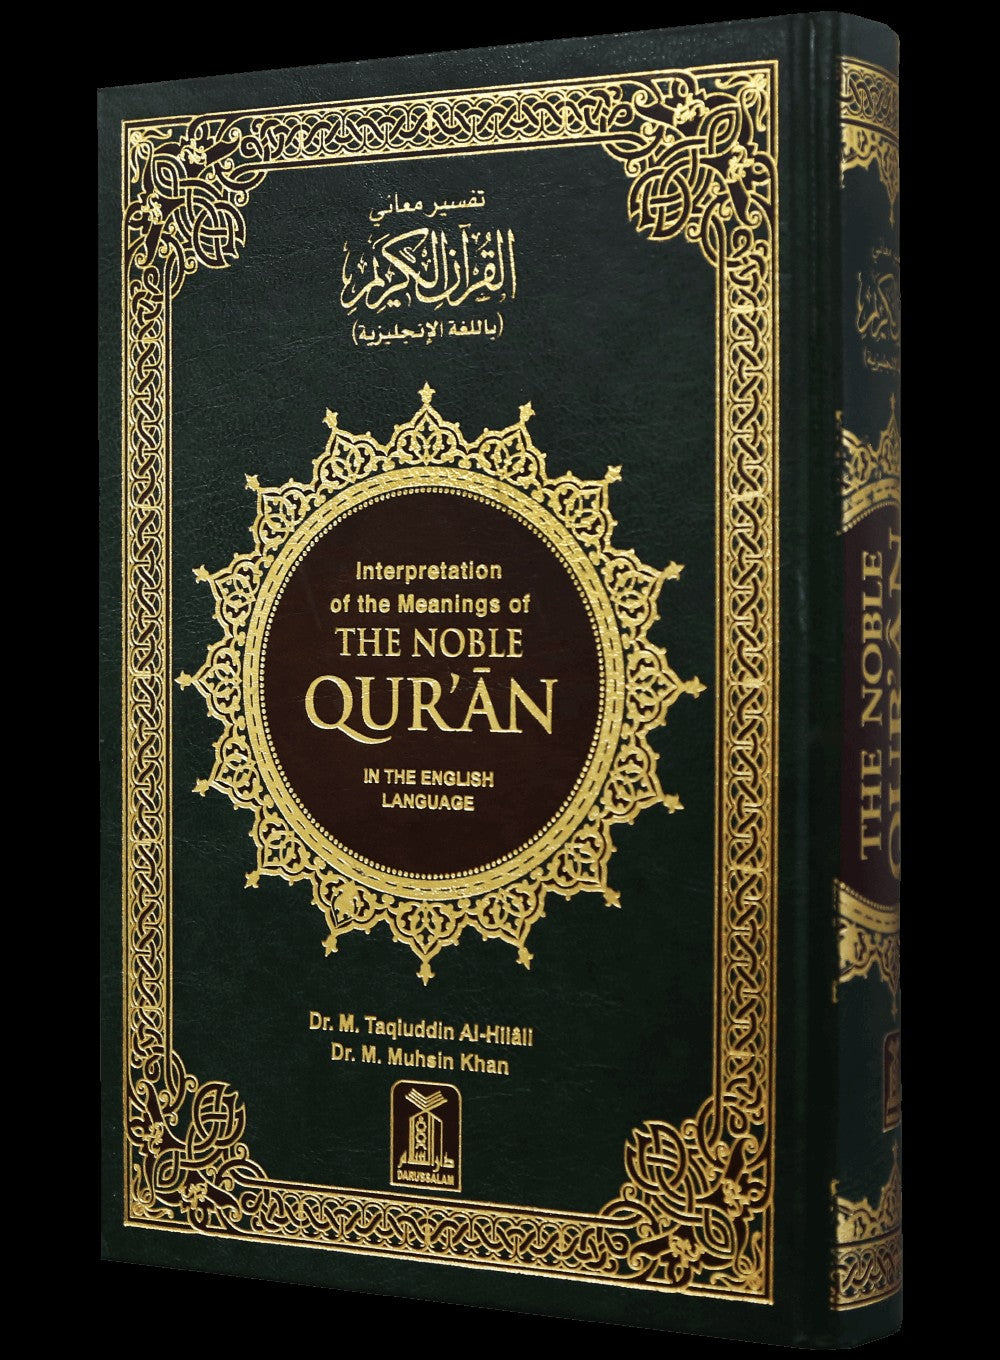 Interpretation of the Meaning of the Noble Qur’an in the English Hardcover A4